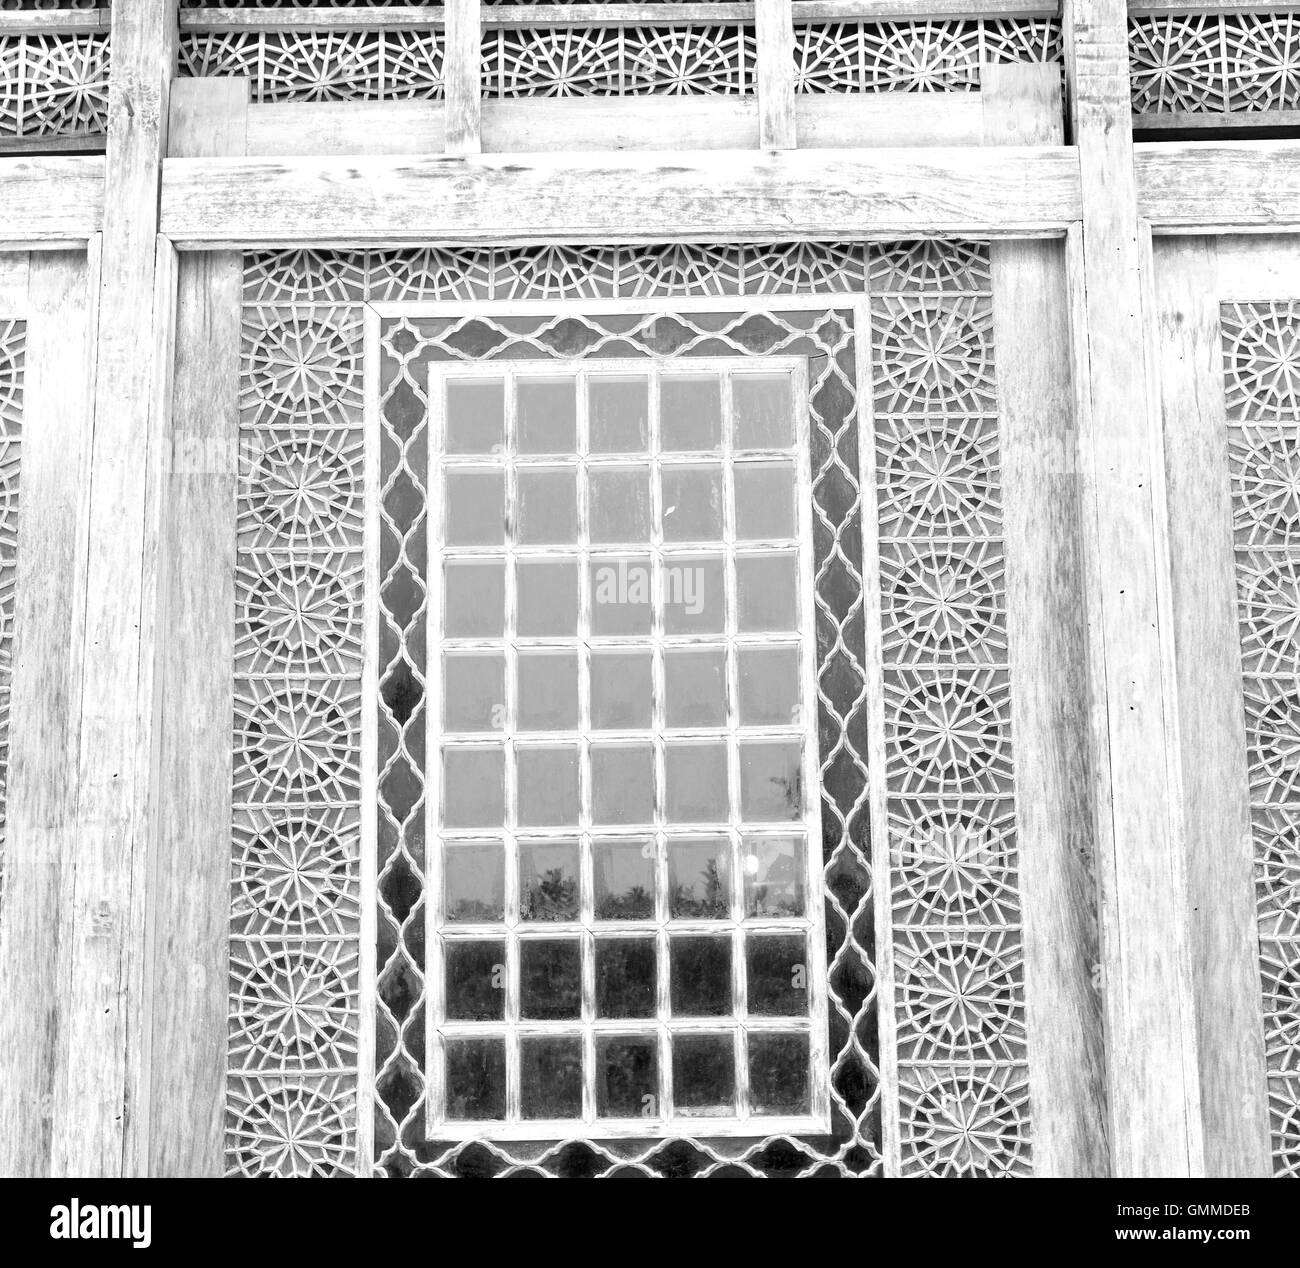 blur in iran shiraz the old persian   architecture window and glass in background Stock Photo